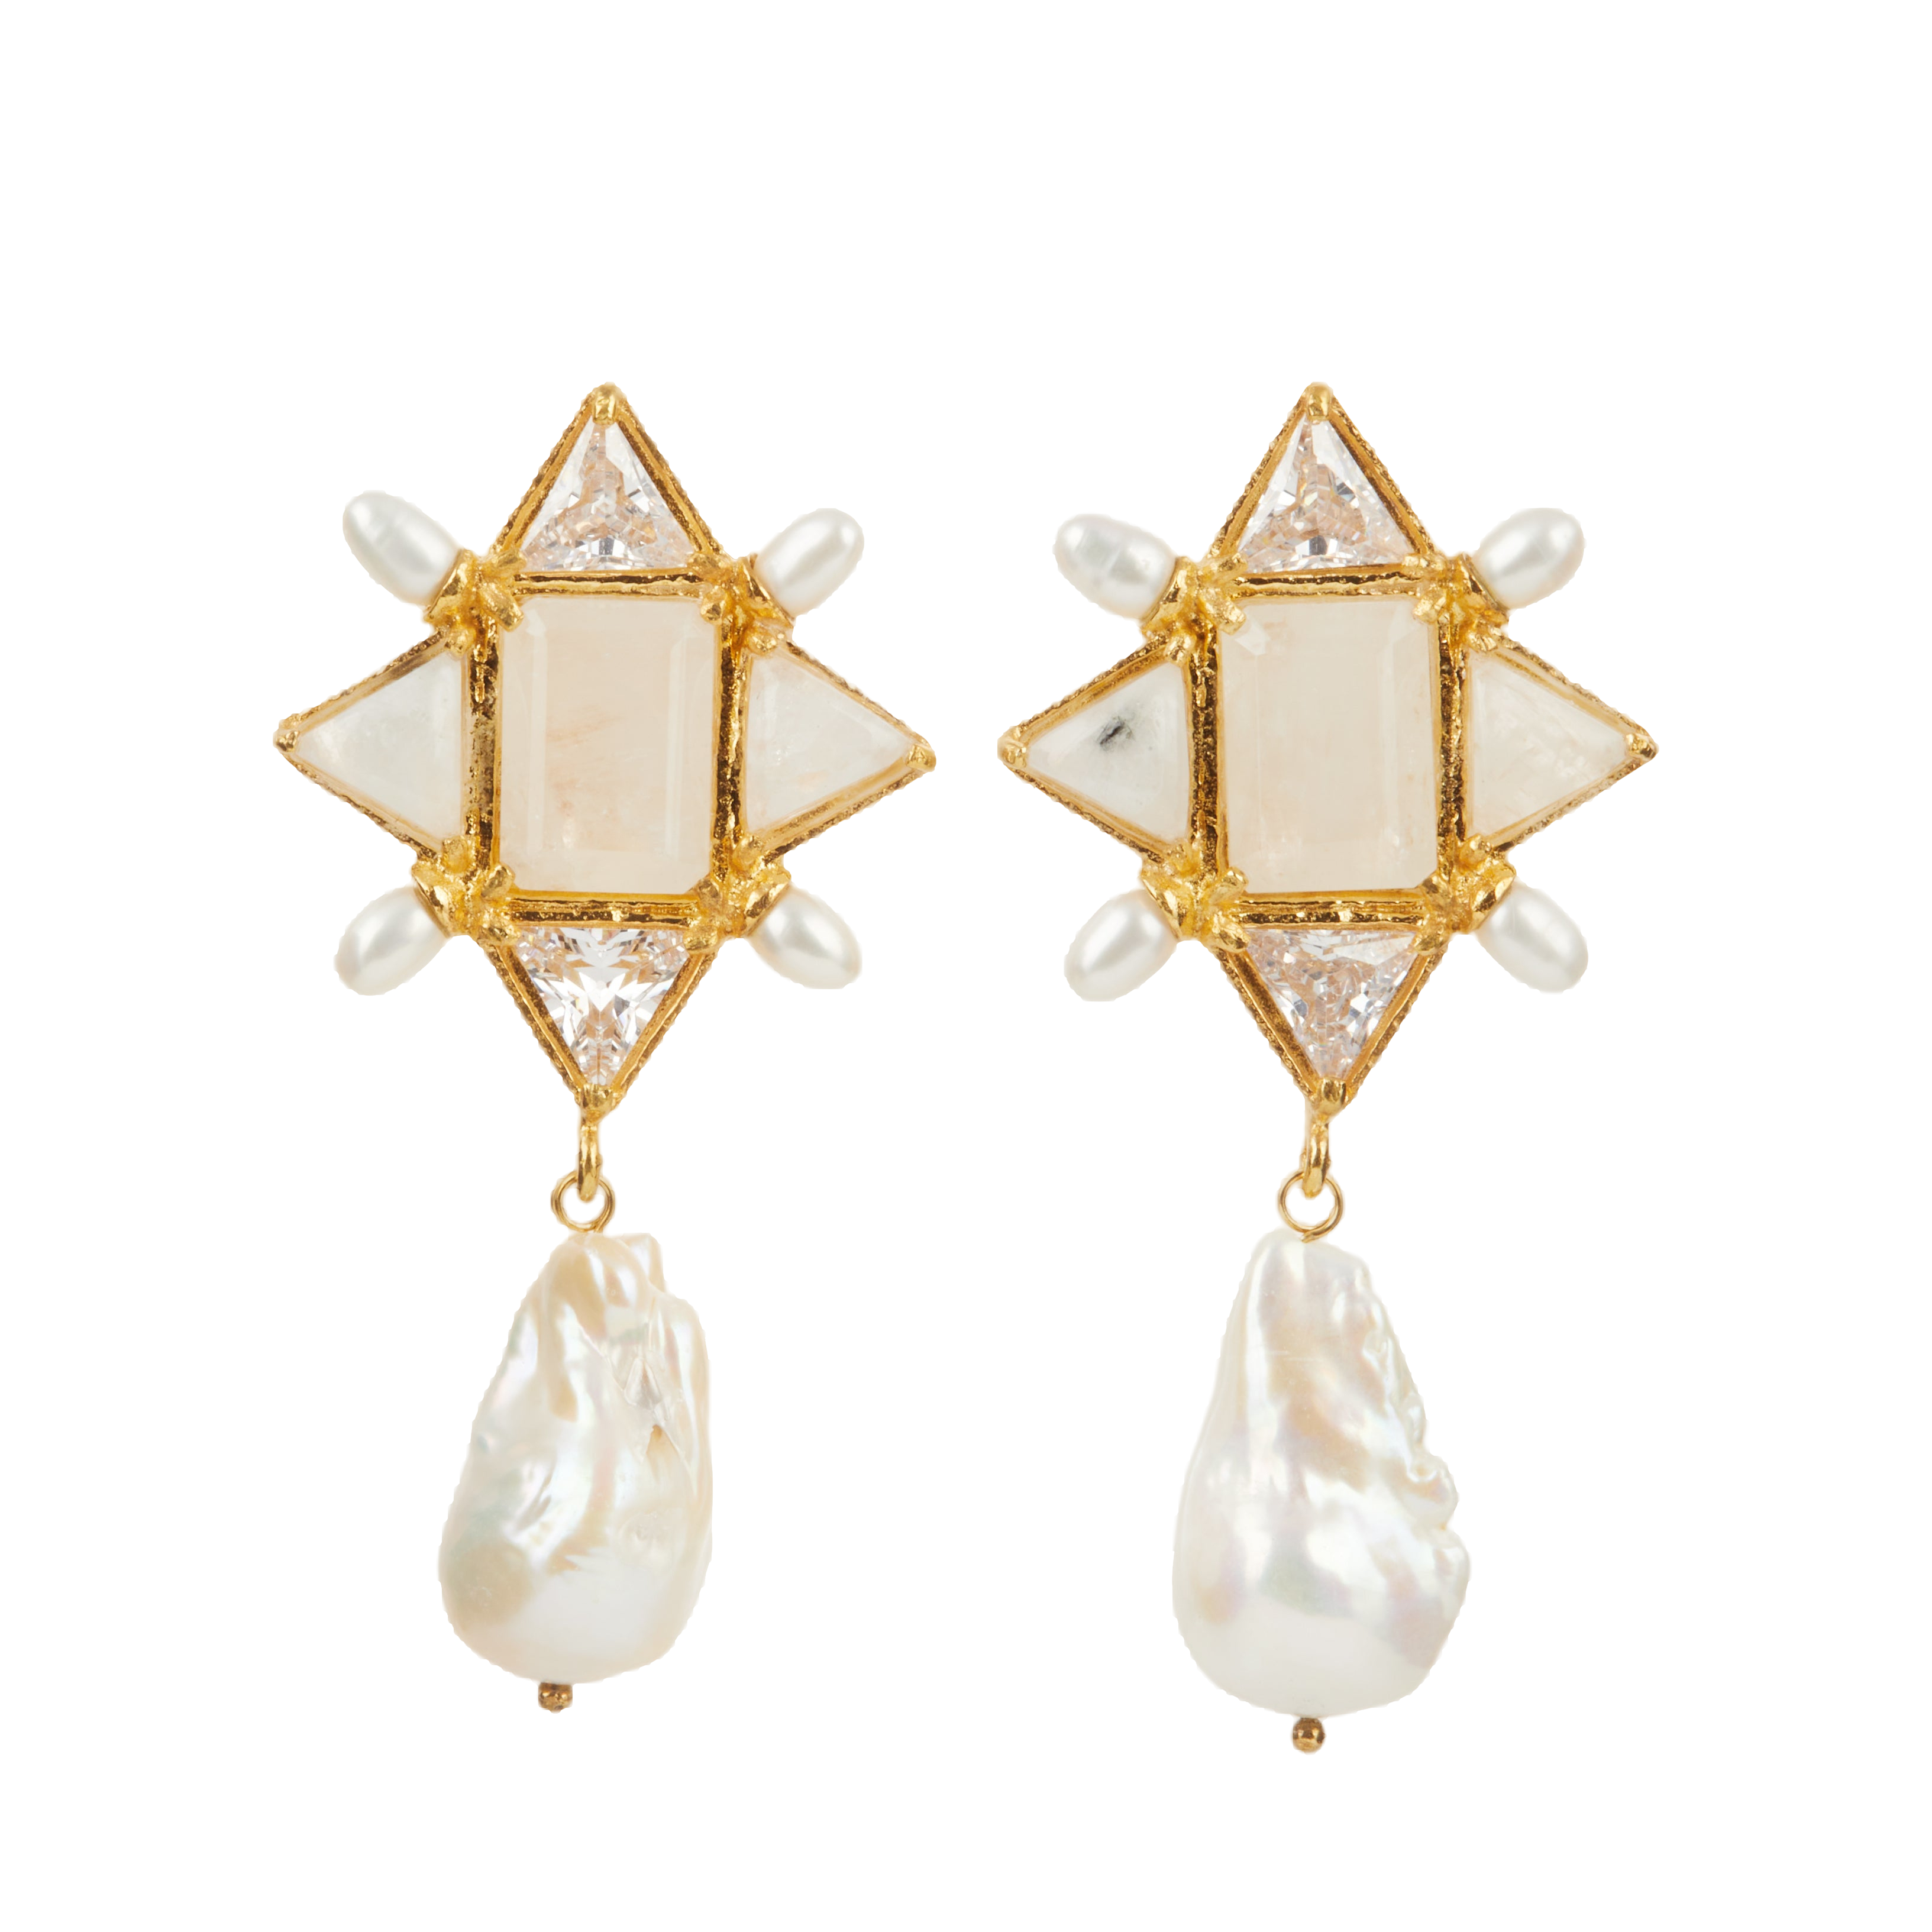 Christie Nicolaides Violetta Earrings White In Gold